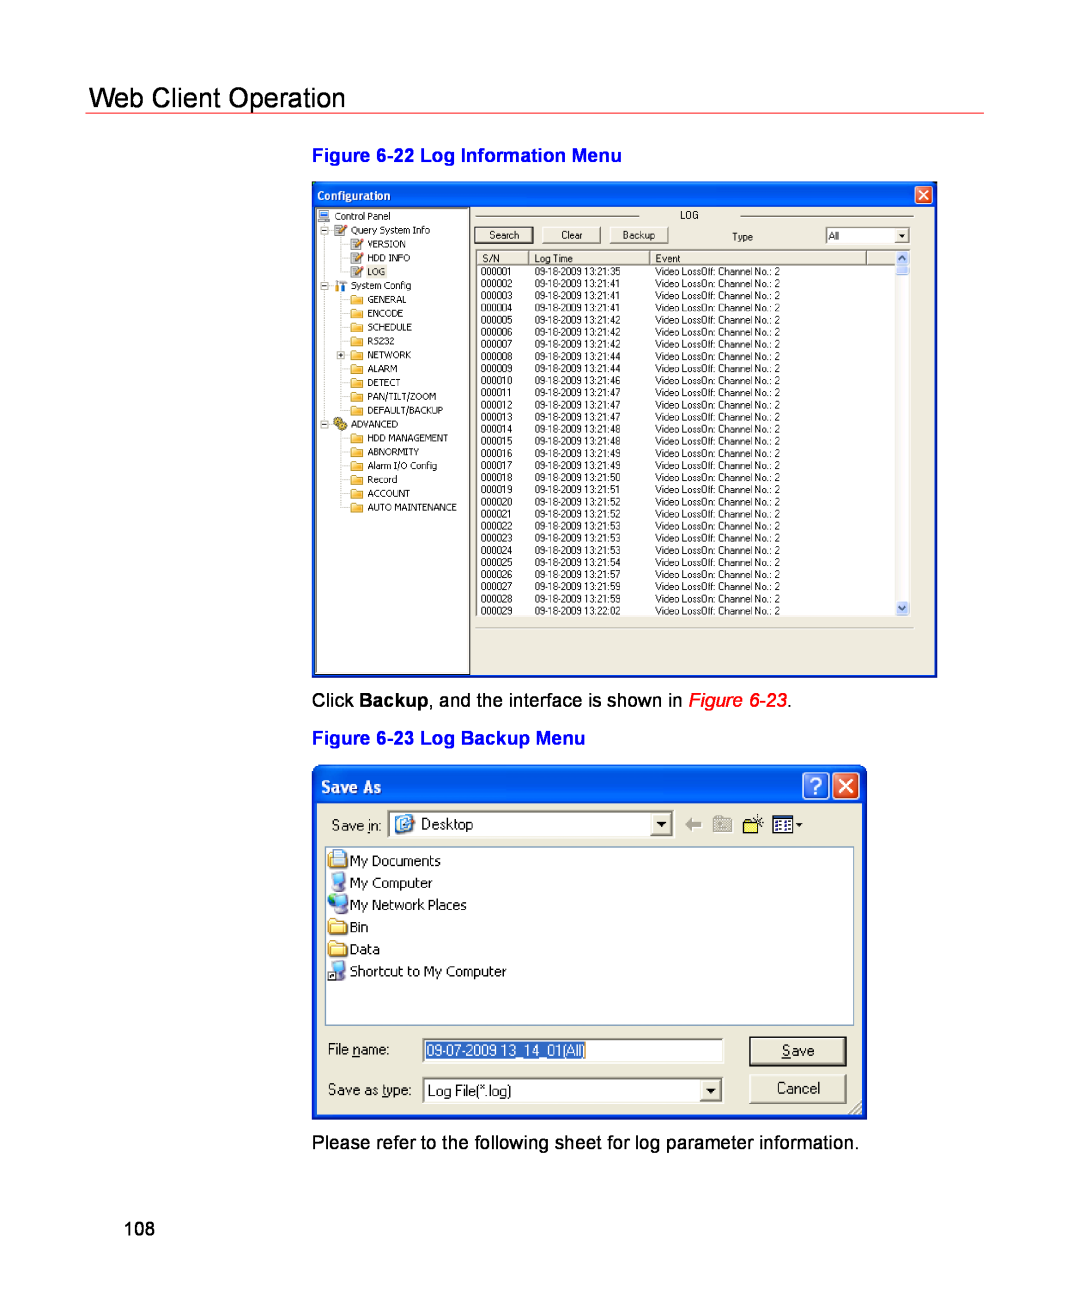 Honeywell HSVR-04 Web Client Operation, 22 Log Information Menu, Click Backup, and the interface is shown in Figure 